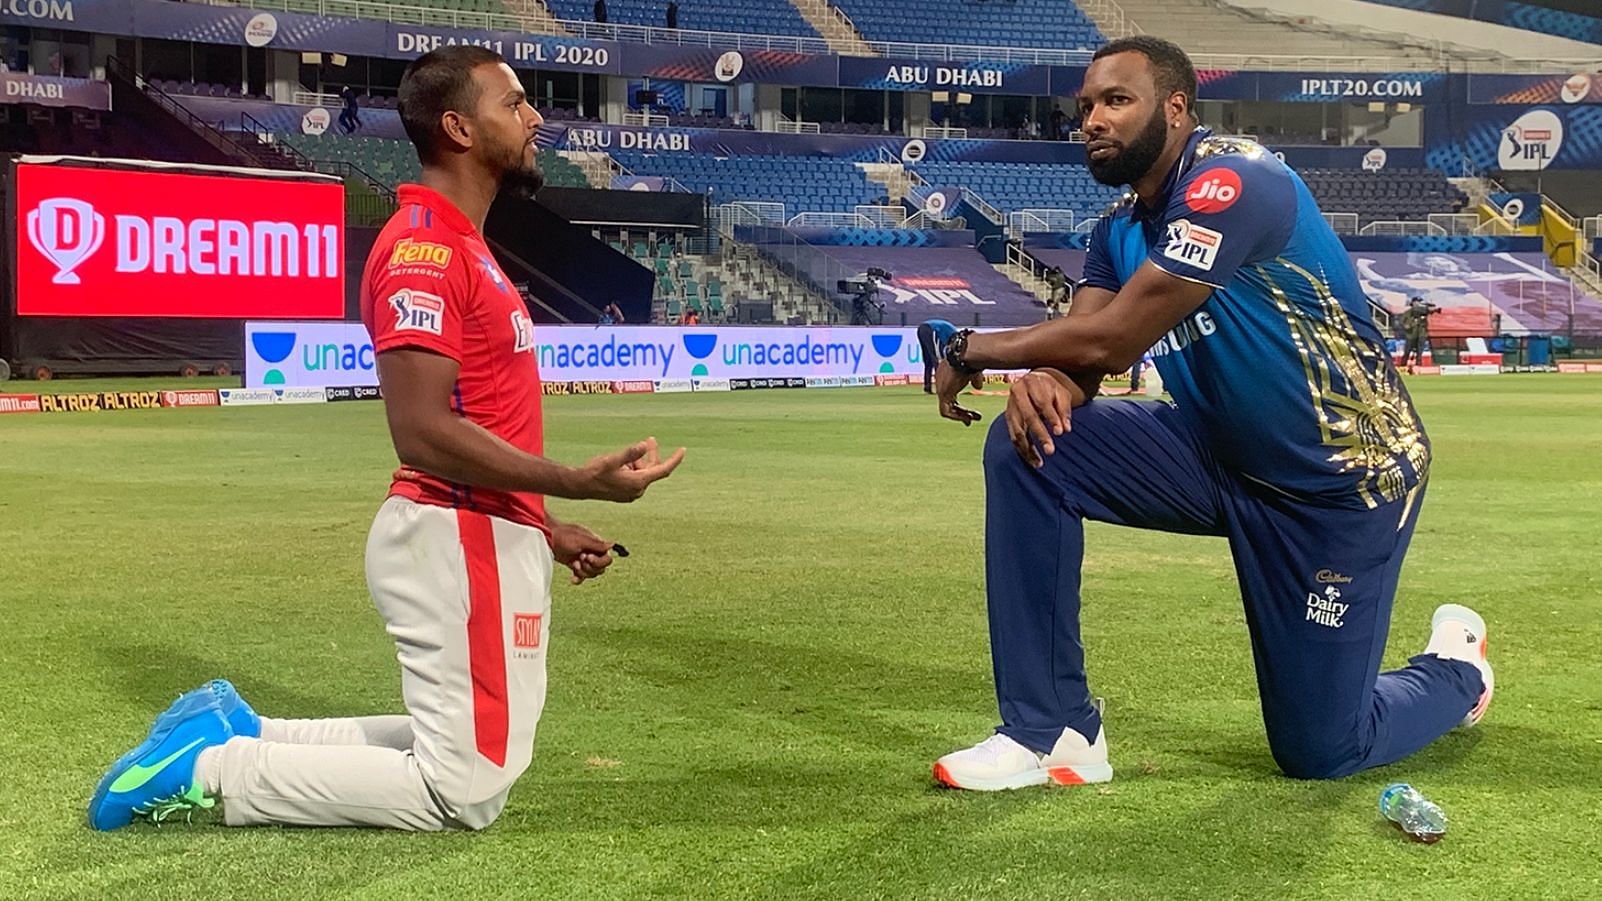 Talk about Kieron Pollard, Nicholas Pooran says that their off-field friendship reflects out there in the middle.